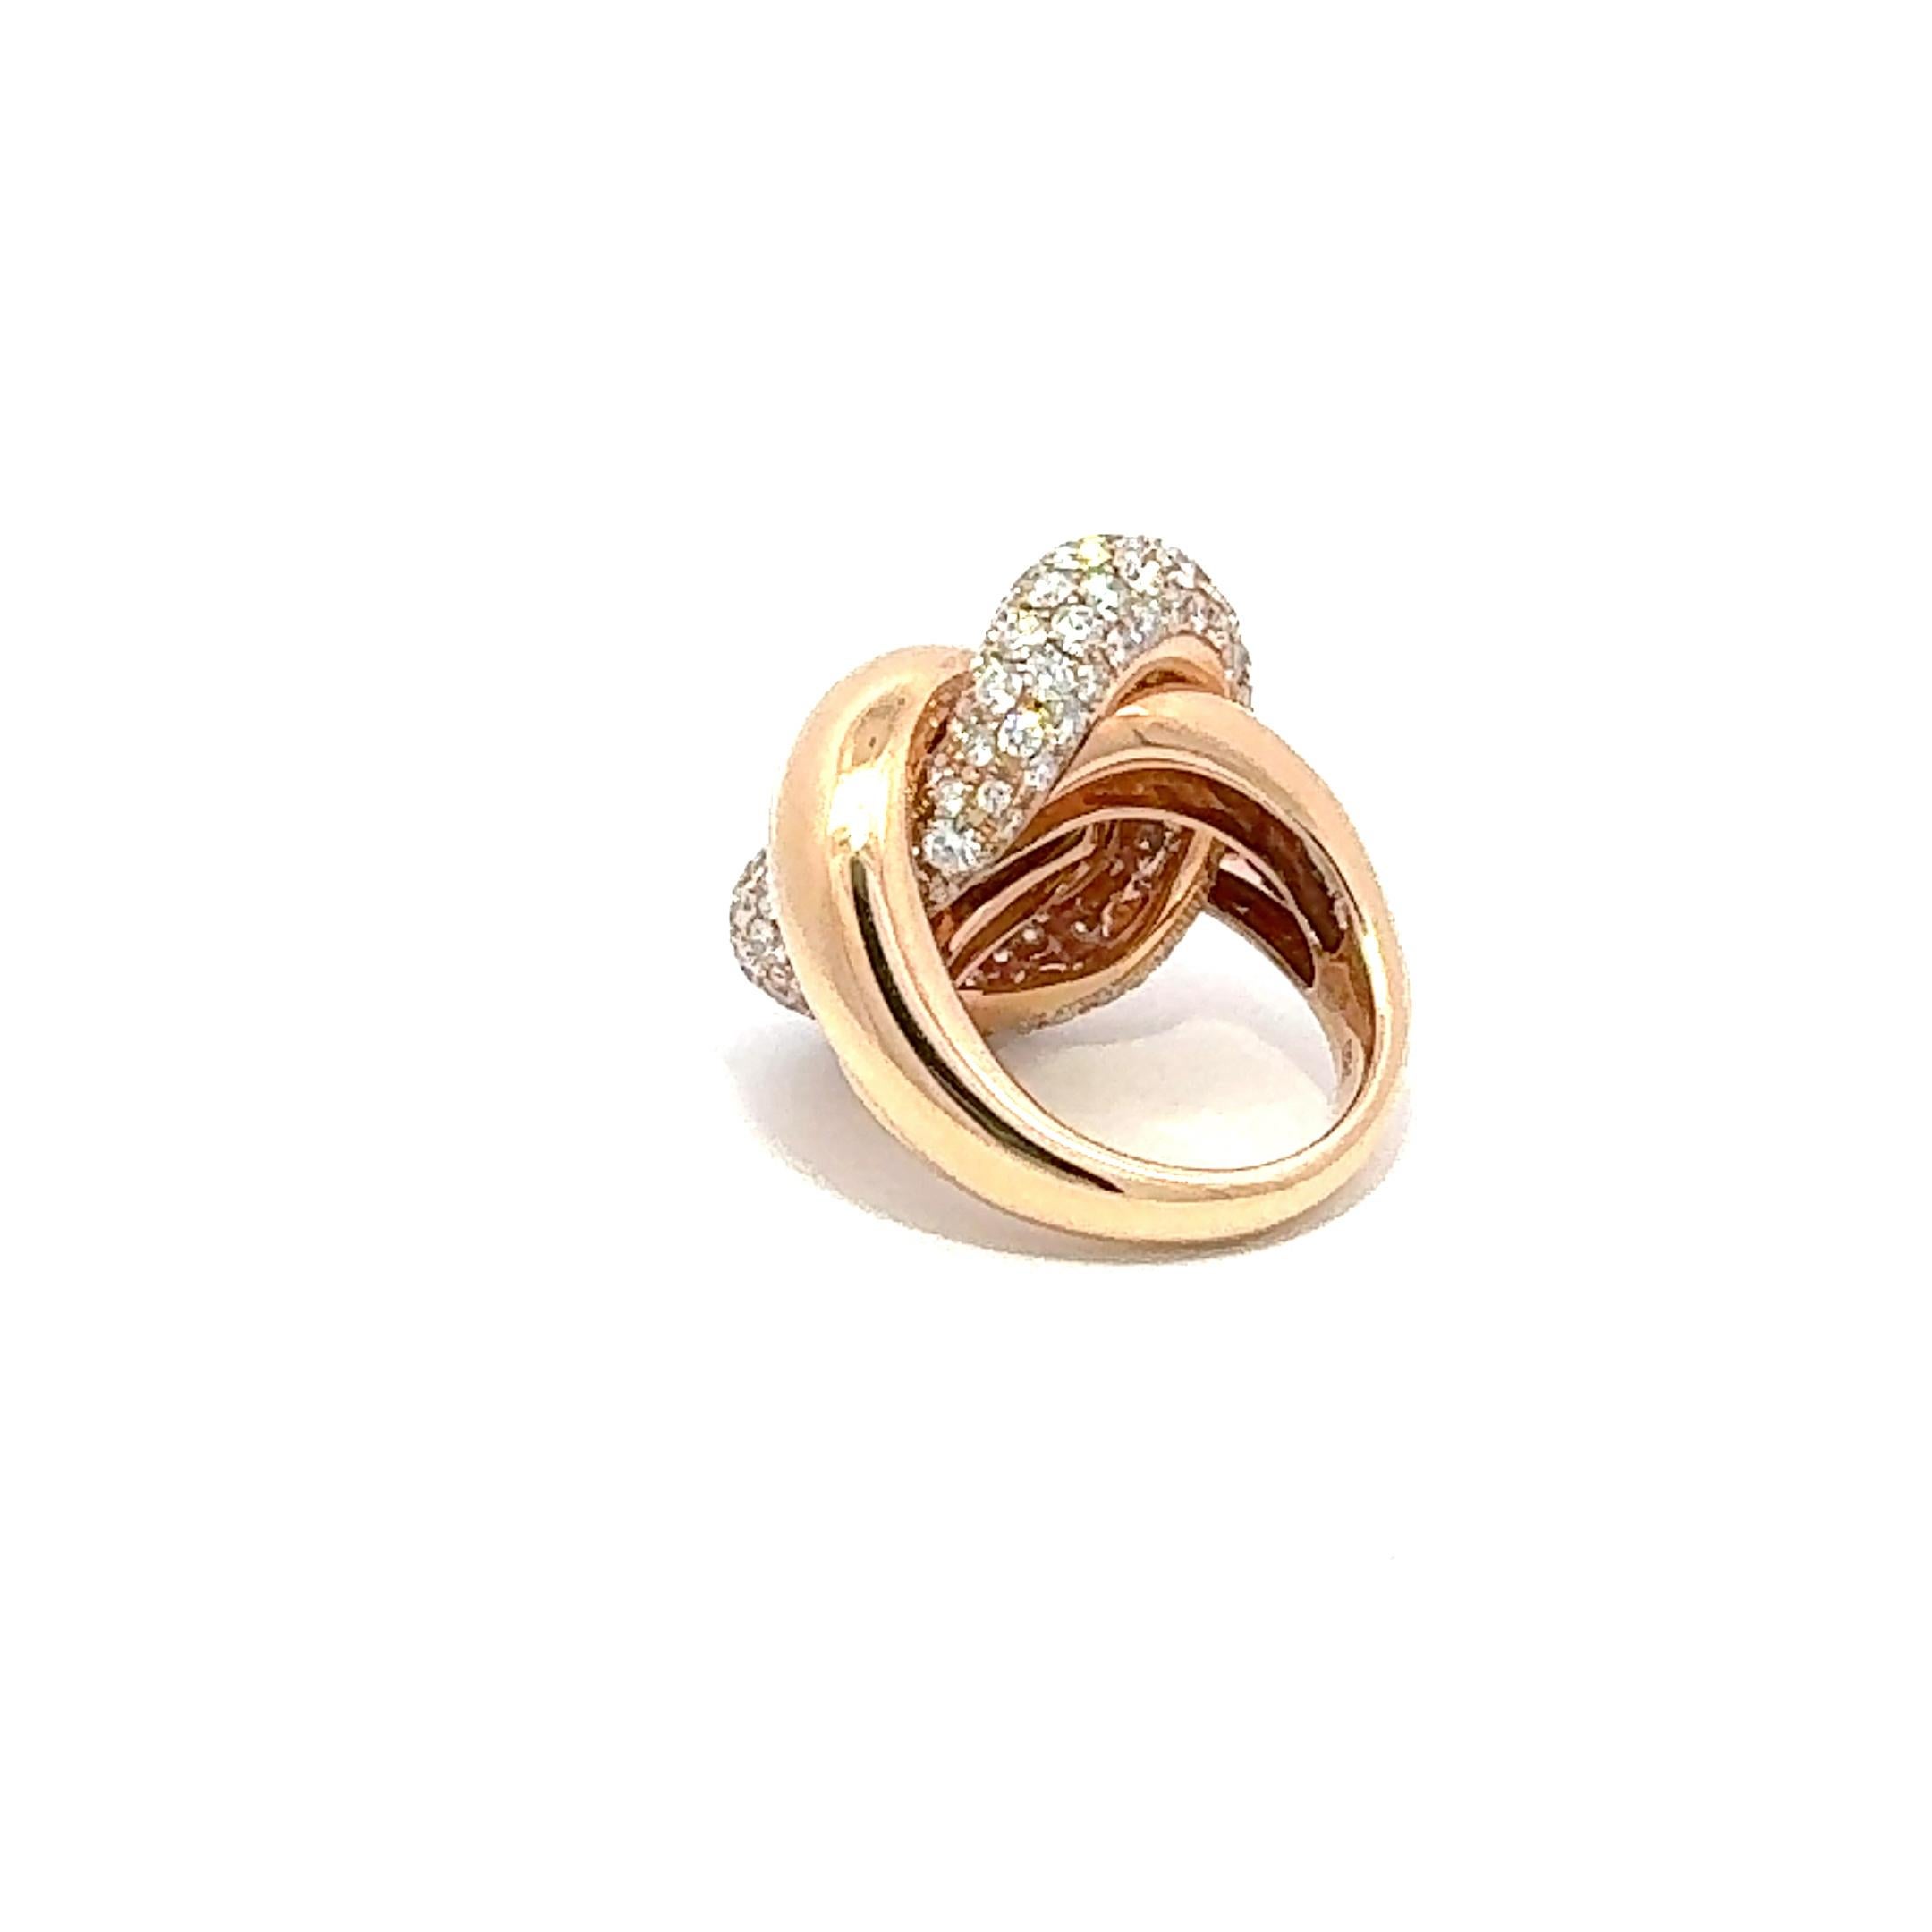 Ring (Matching Earrings Available)


18K Yellow Gold 

Diamonds 5.77 ct

Weight 25,2 grams

With a heritage of ancient fine Swiss jewelry traditions, NATKINA is a Geneva based jewellery brand, which creates modern jewellery masterpieces suitable for